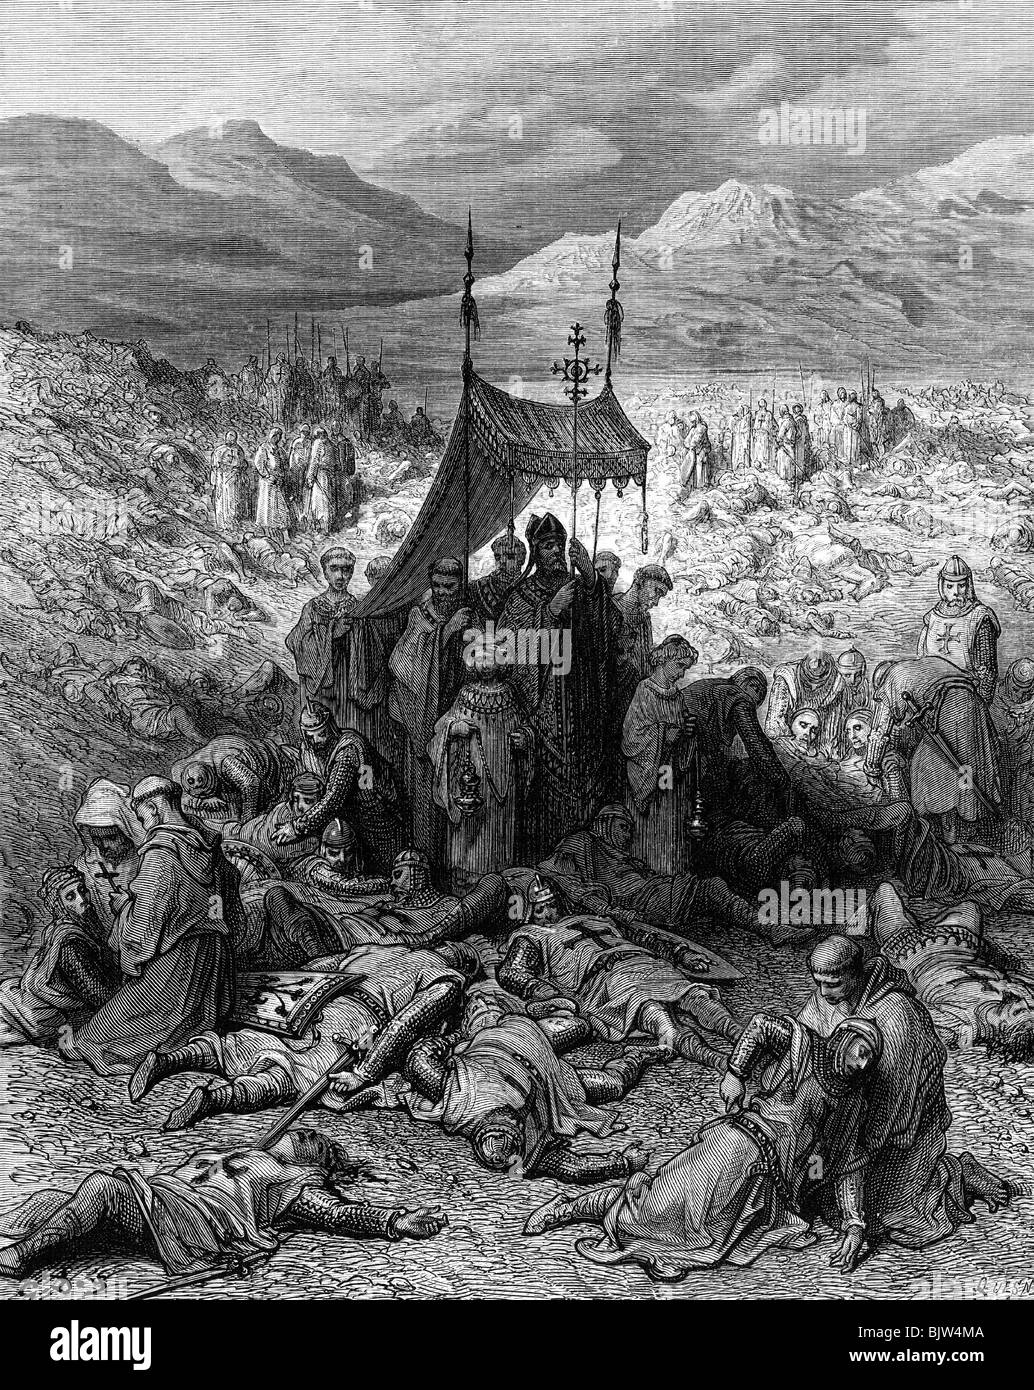 Middle Ages, crusades, First Crusade 1096 - 1099, Battle of Antioch, 28.6.1098, burial of the dead, wood engraving by Quesnel after drawing by Gustav Dore, 'Histoire des croisades' by Joseph Francois Michaud, 1875, Artist's Copyright has not to be cleared Stock Photo